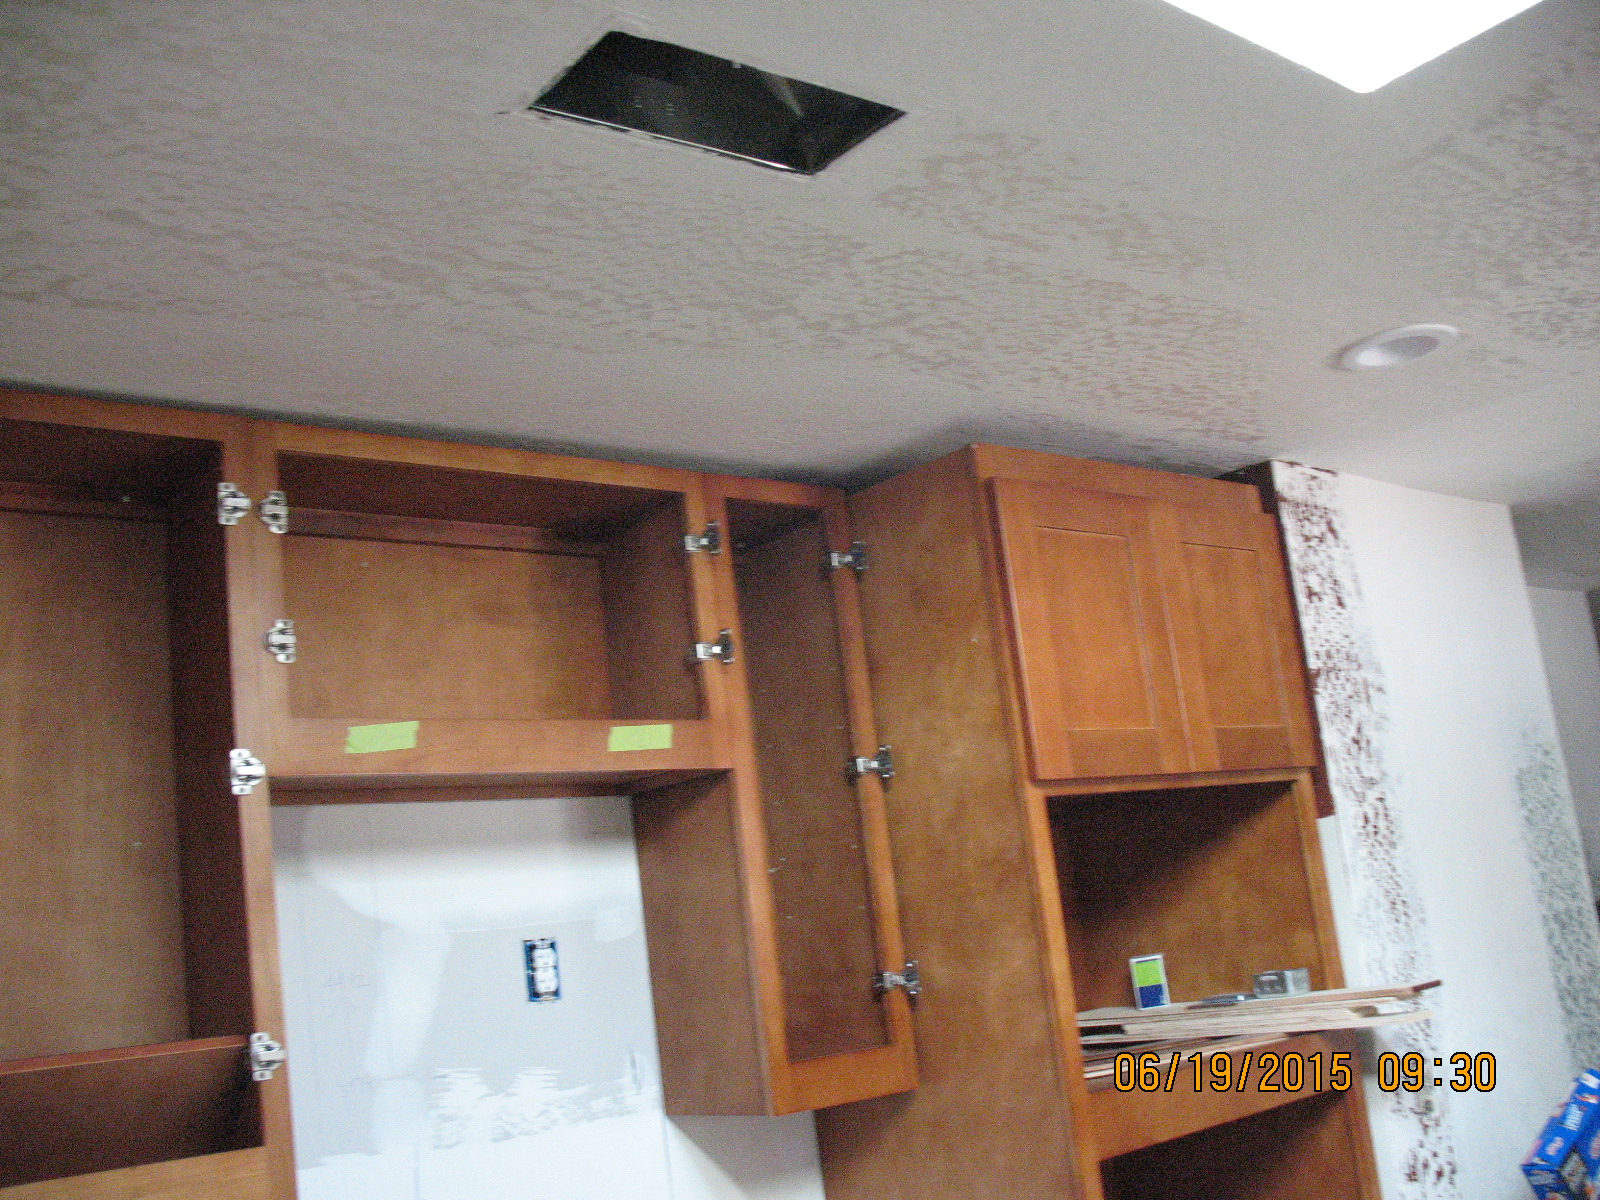 Wall cabinets hung upside down another  example of there poor labor they use
